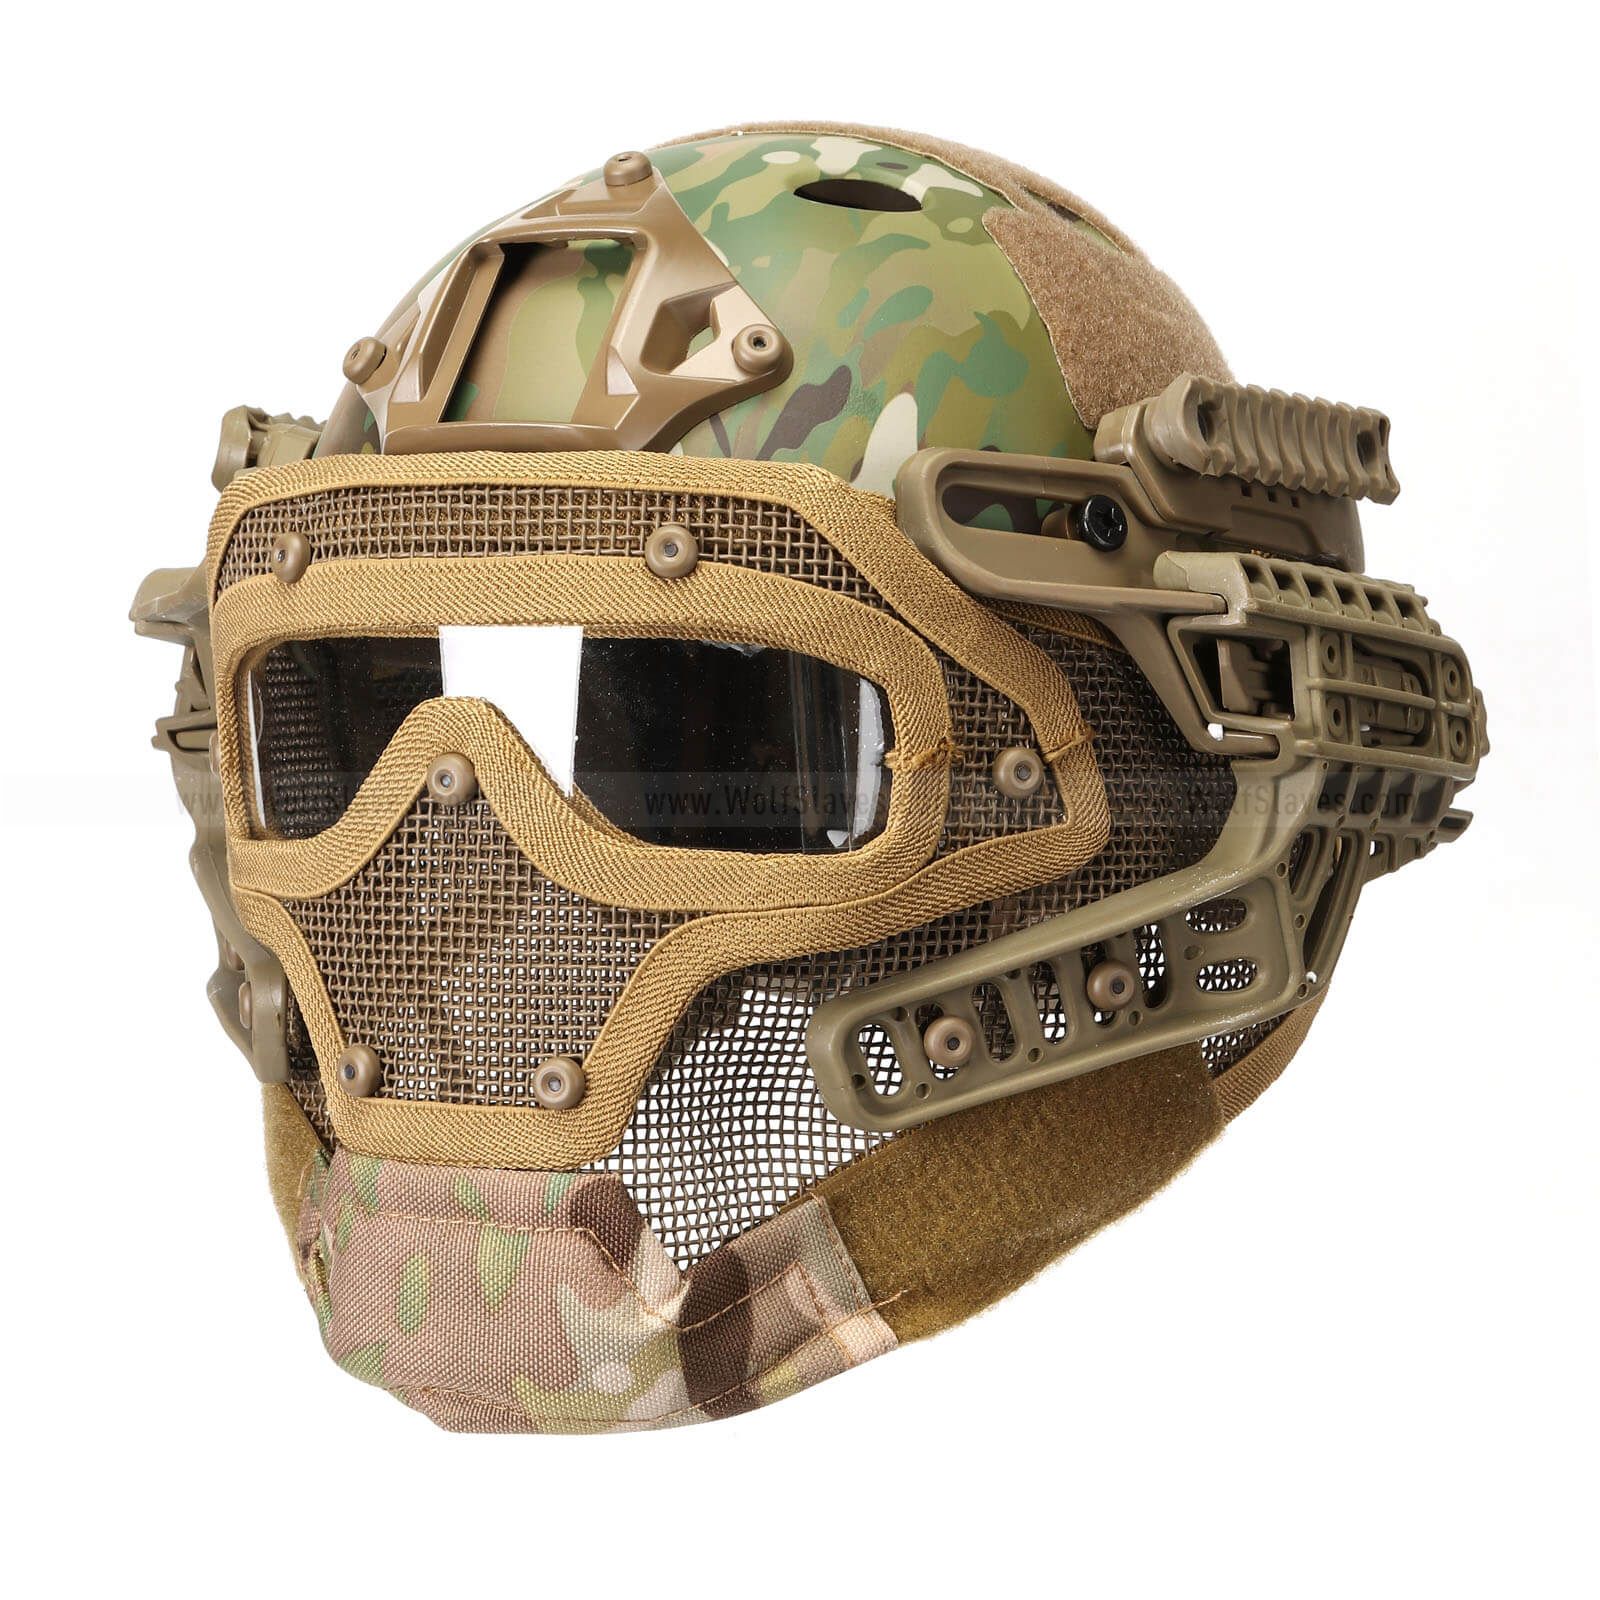 Airsoft Piloter Bump Helmet System Large Size Protective Head Black 